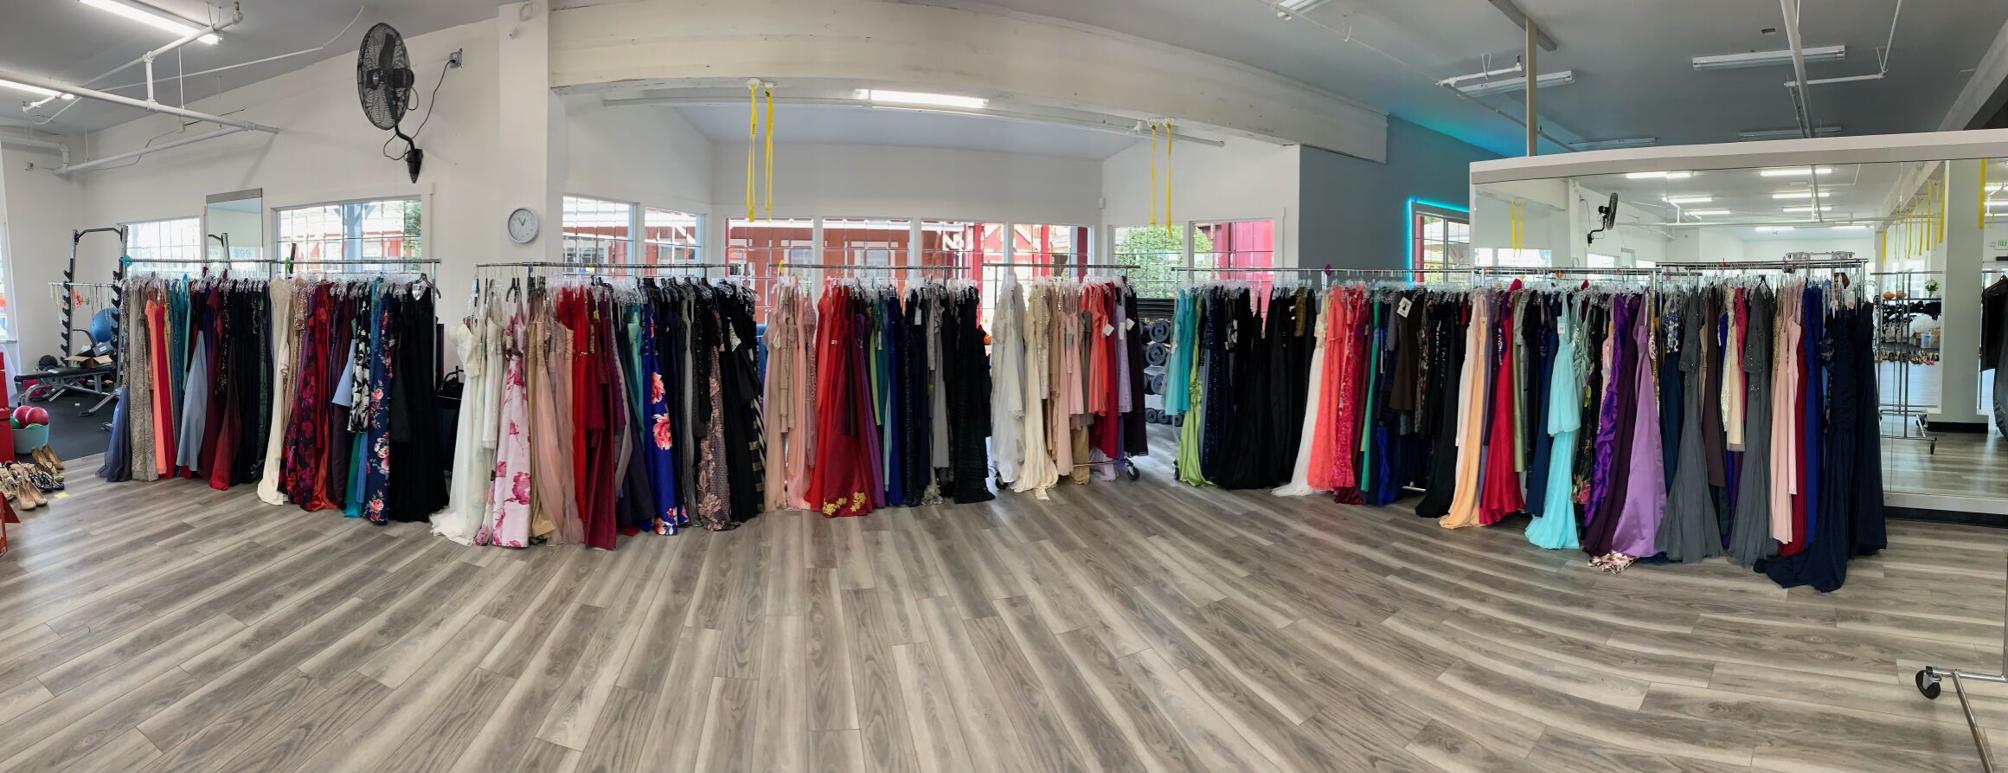 ‘Say Yes to a Prom Dress’ ready for donations | Community | hmbreview.com